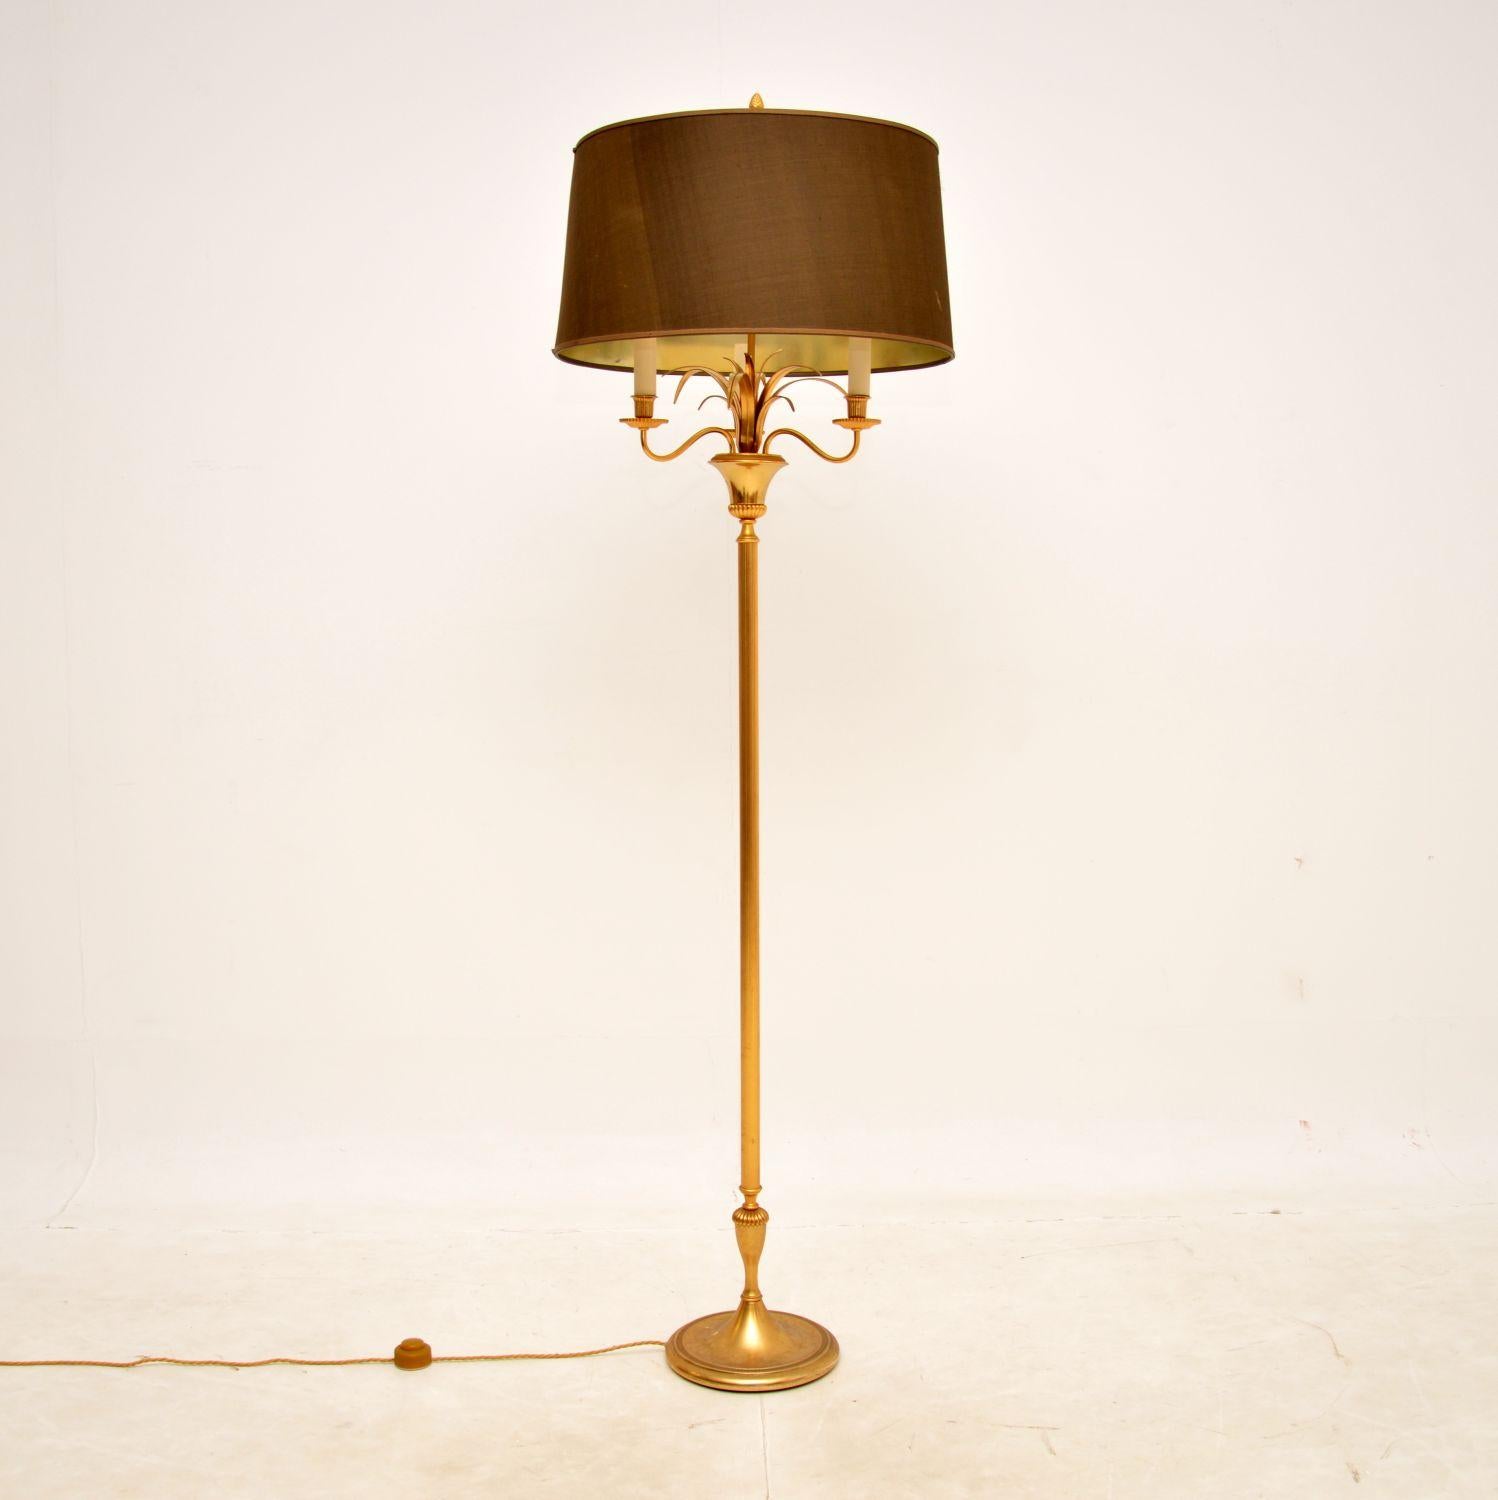 A very stylish and extremely well made 1970’s vintage French brass floor lamp. This was made in France, it dates from the 1970’s.

It has a gorgeous design, with three candelabra heads coming out of an urn shaped centre with protruding reed leaves